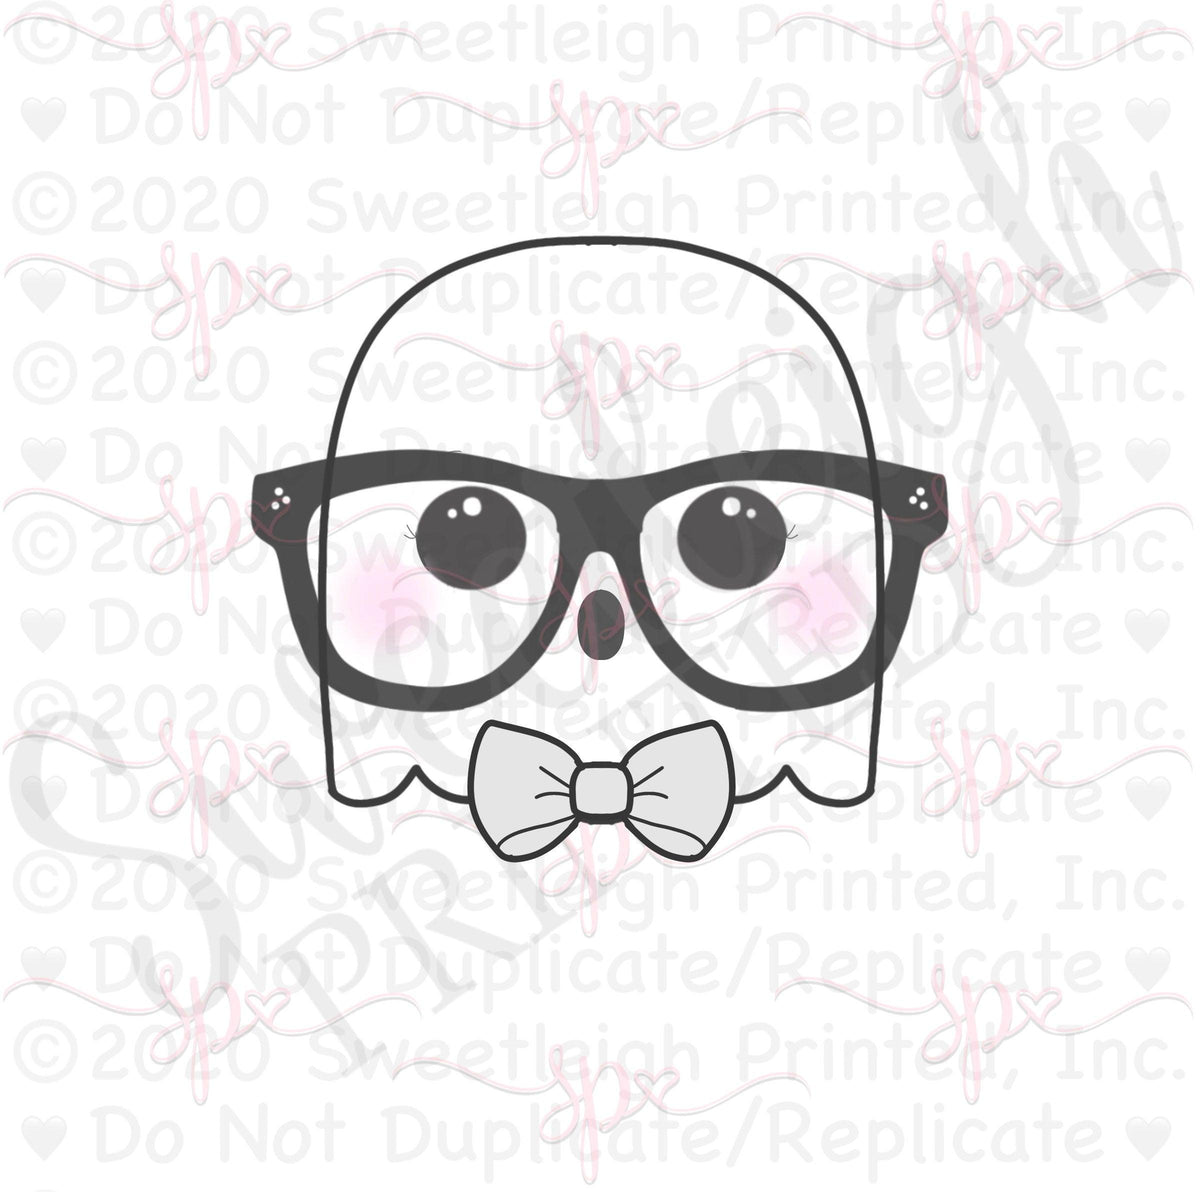 Bowtie Nerdy Ghost 1 Cookie Cutter - Sweetleigh 